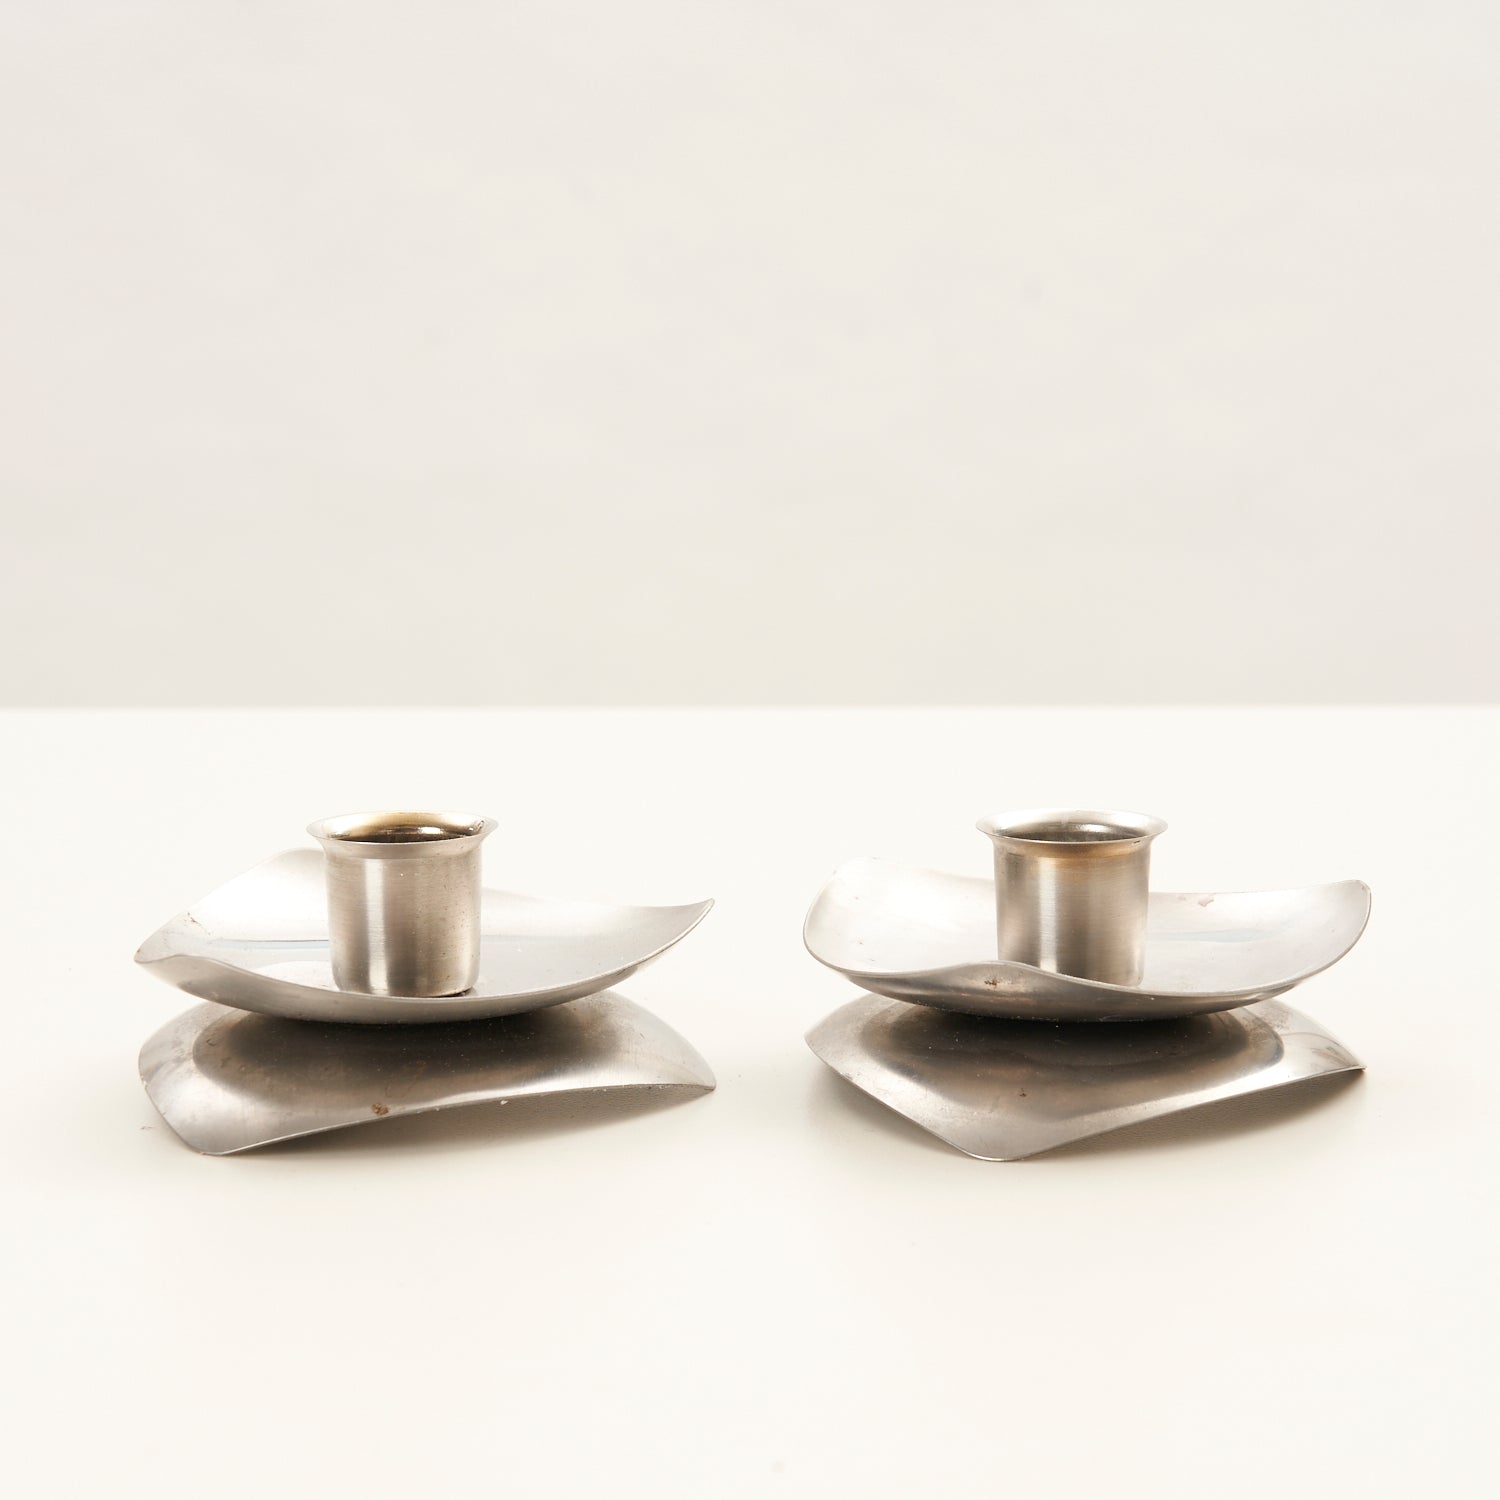 Set of 4 Stainless Steel Candle Stands